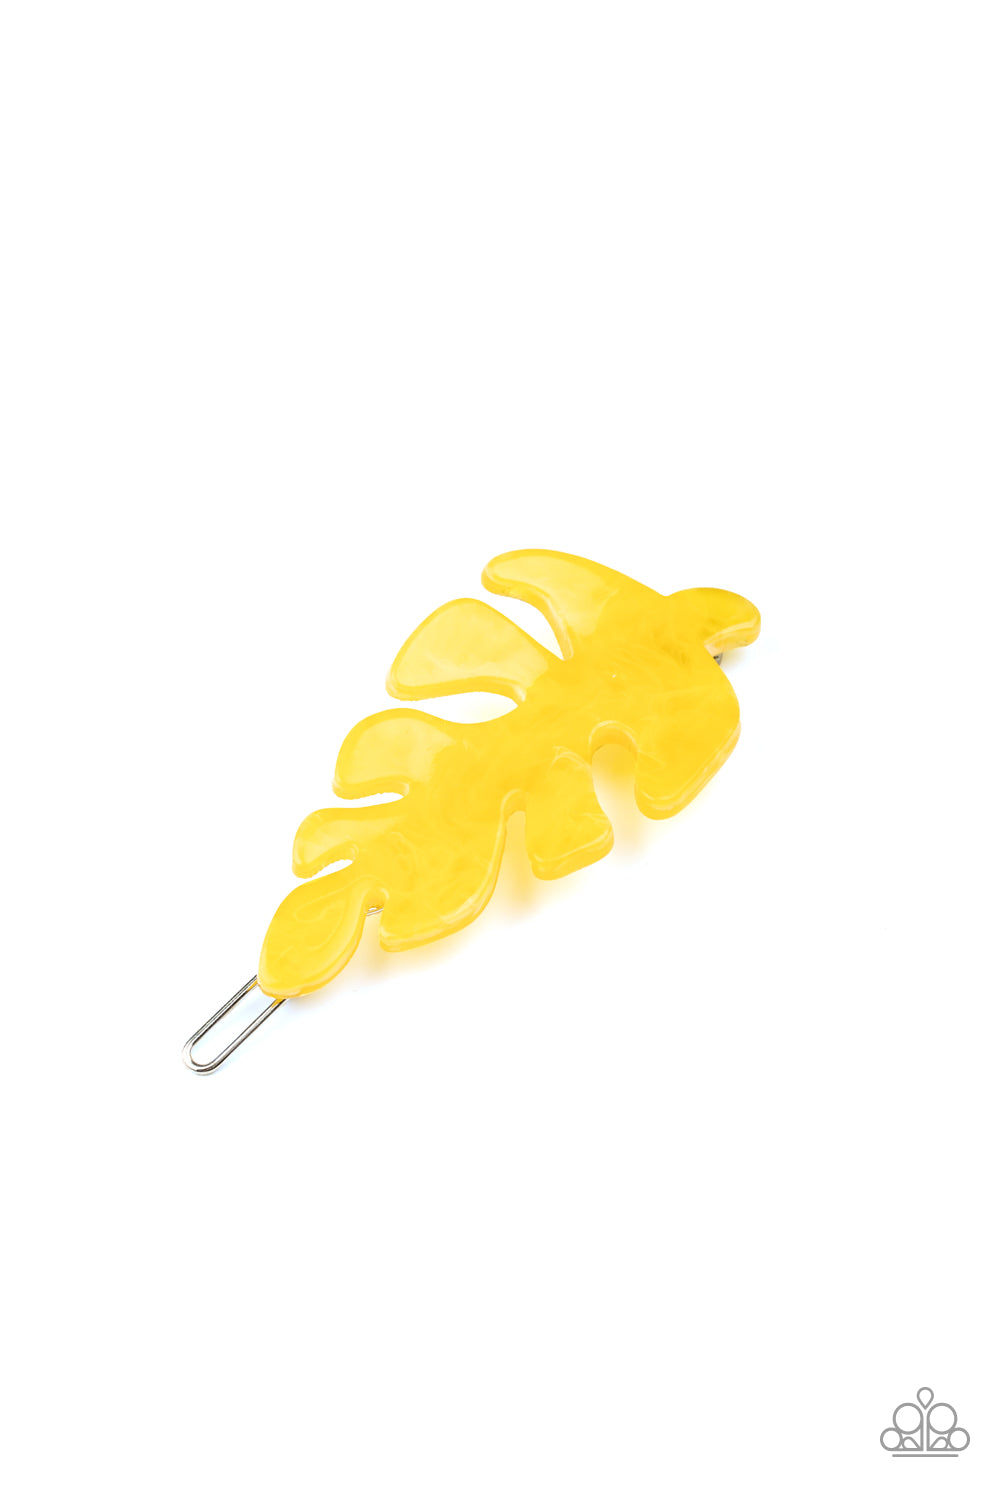 Paparazzi LEAF Your Mark - Yellow - Acrylic Leaf - Hair Clip / Clamp Barrette Closure - $5 Jewelry with Ashley Swint